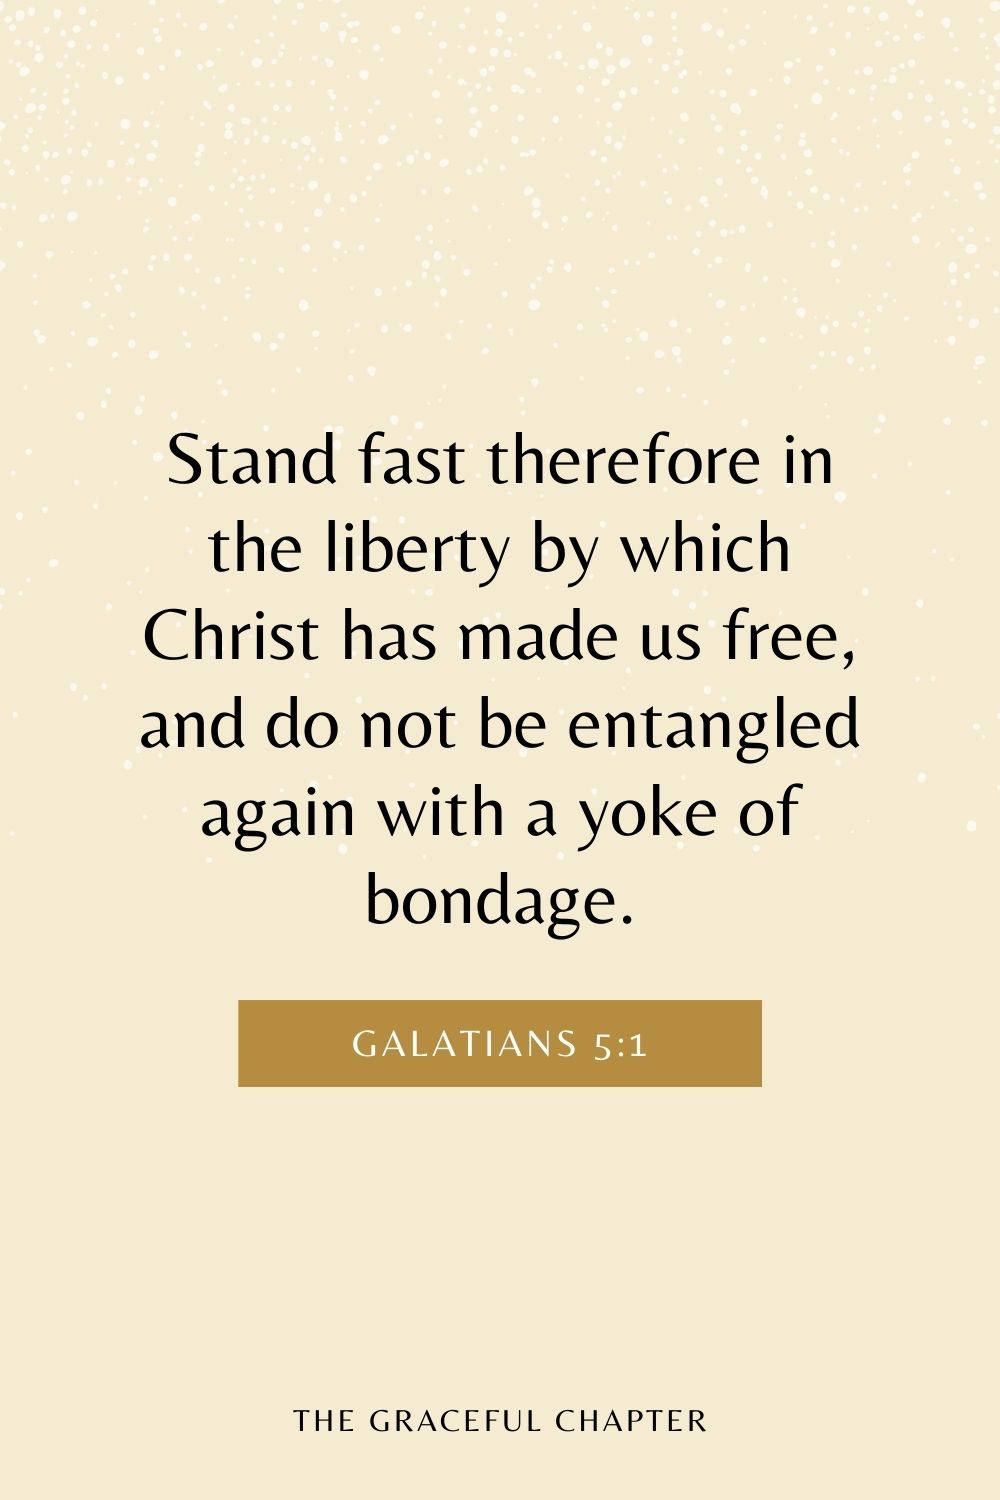 Stand fast therefore in the liberty by which Christ has made us free, and do not be entangled again with a yoke of bondage. Galatians 5:1